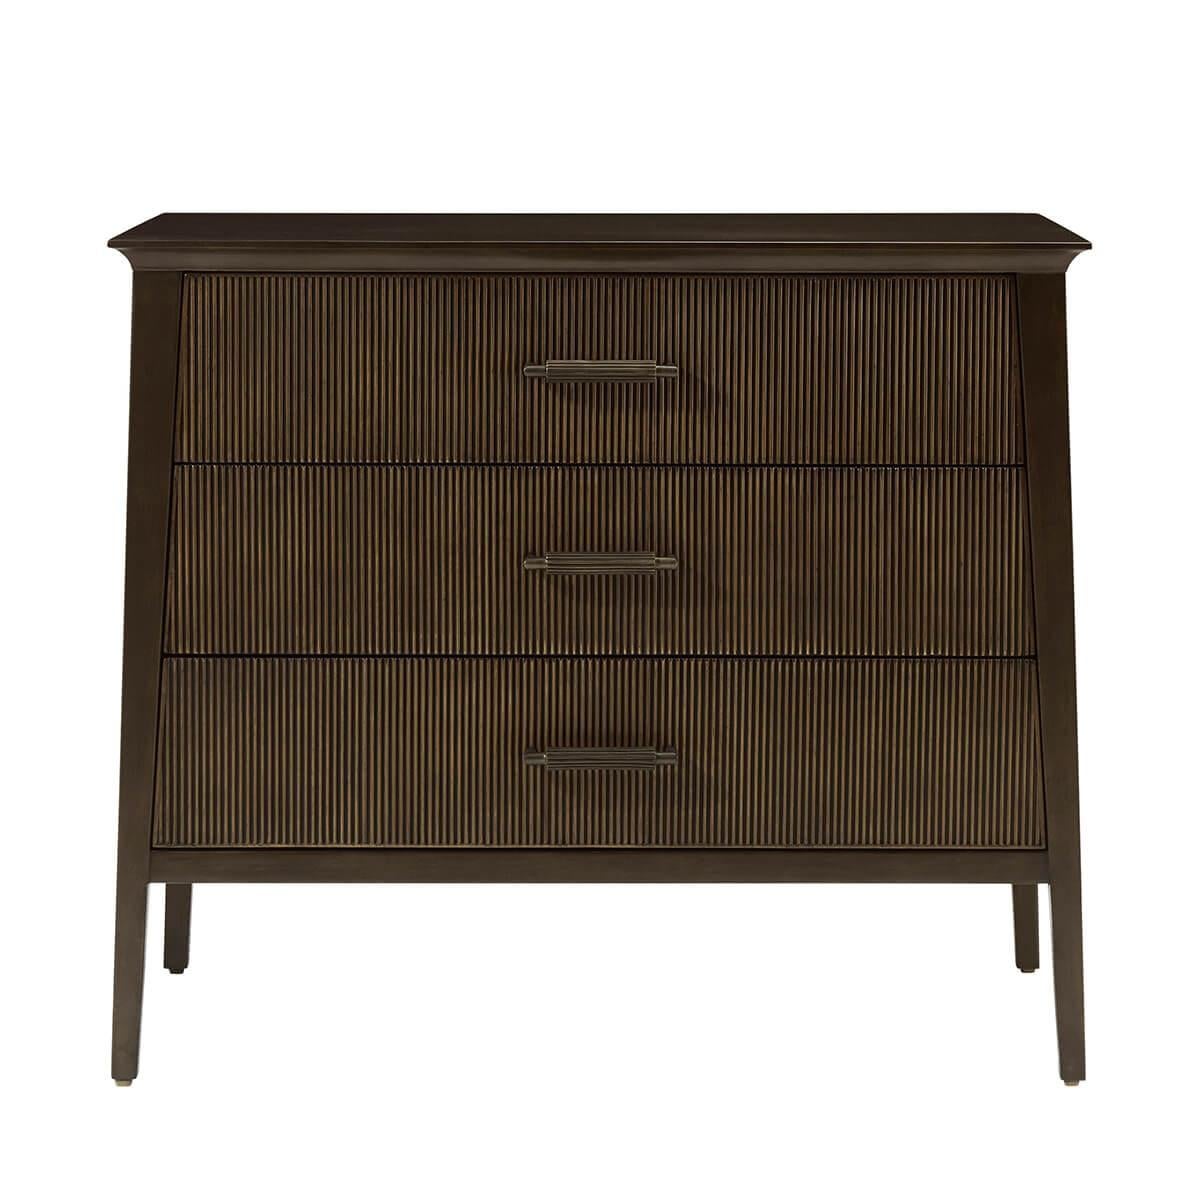 In our Bistre finish, features a sophisticated tapered silhouette with three reeded drawers. The custom forged hardware, finished in a dark rubbed bronze, echoes the reeded details throughout.

Dimensions: 32